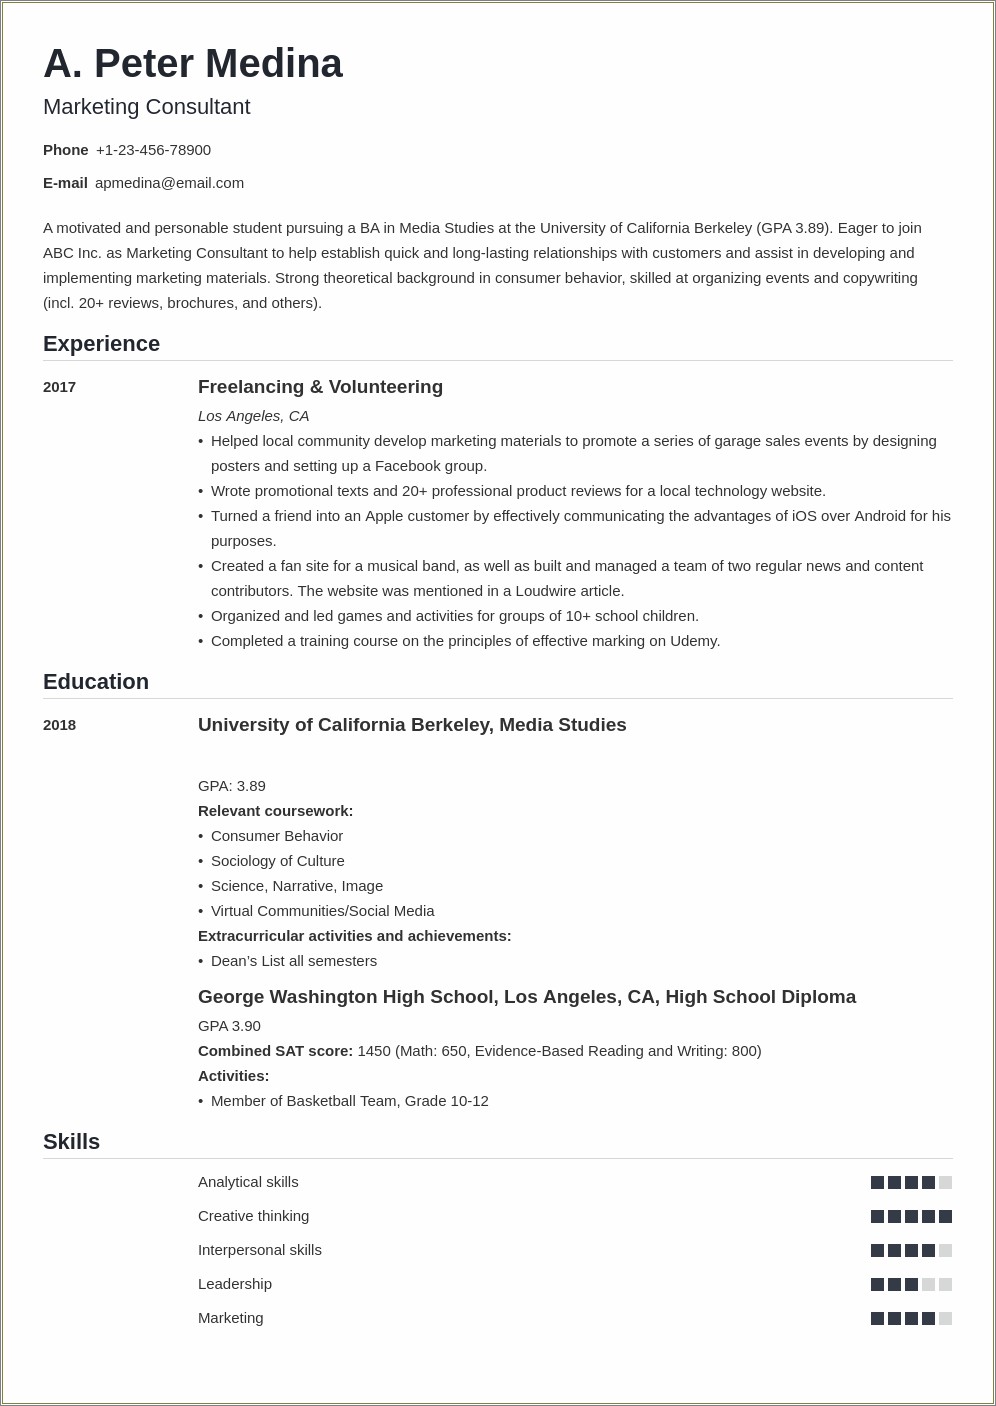 Professional Summary For Resume Without Experience